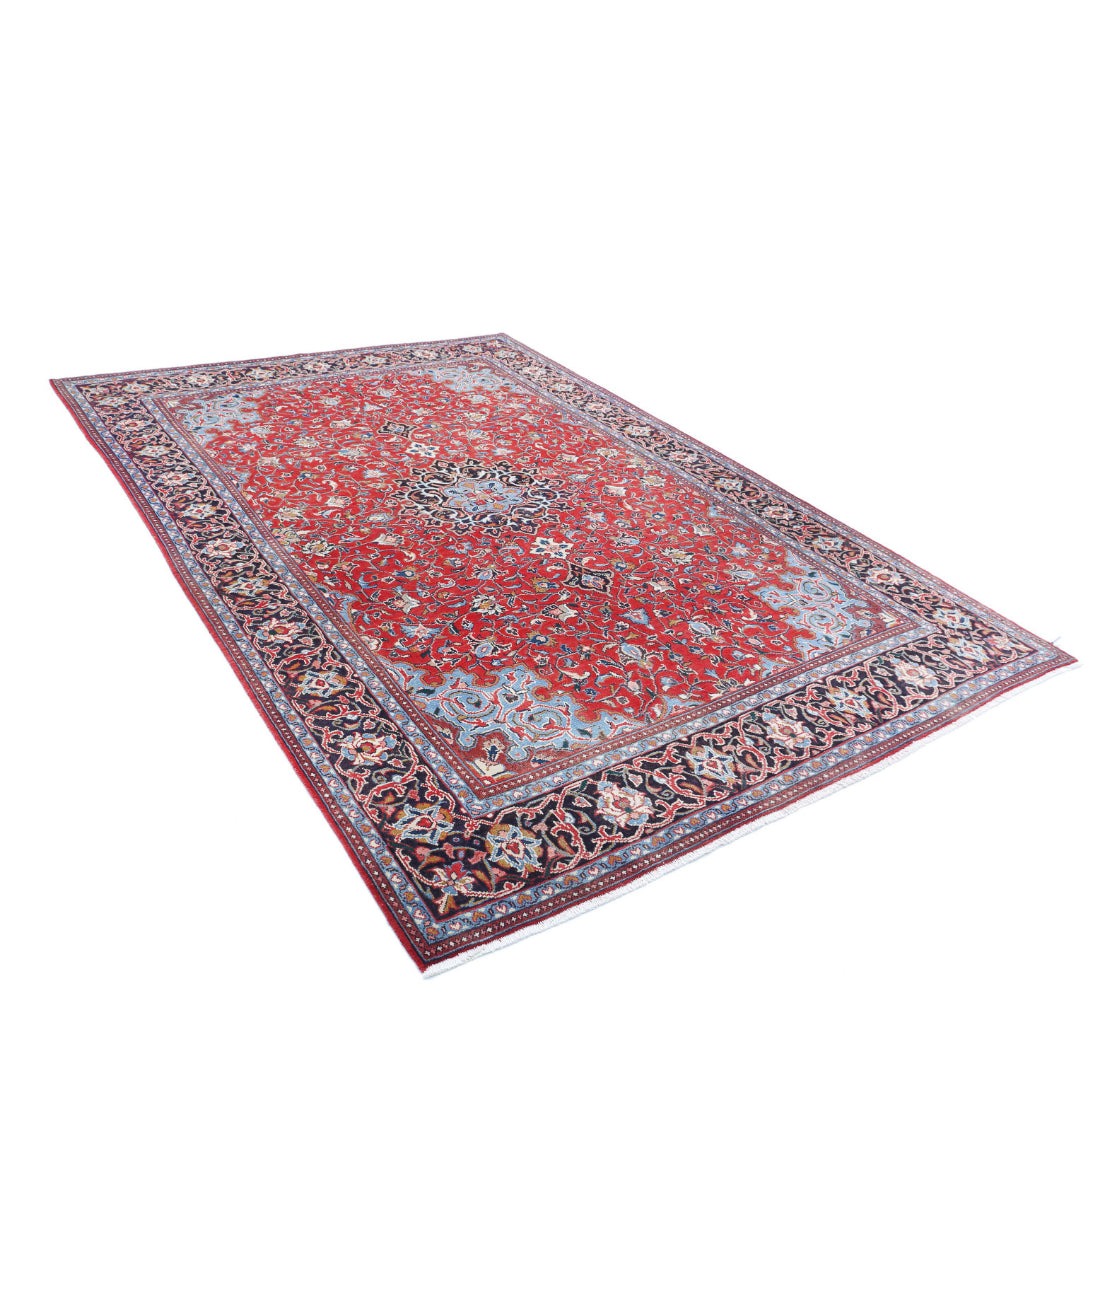 Hand Knotted Persian Mahal Wool Rug - 7'1'' x 10'6'' 7'1'' x 10'6'' (213 X 315) / Red / Black